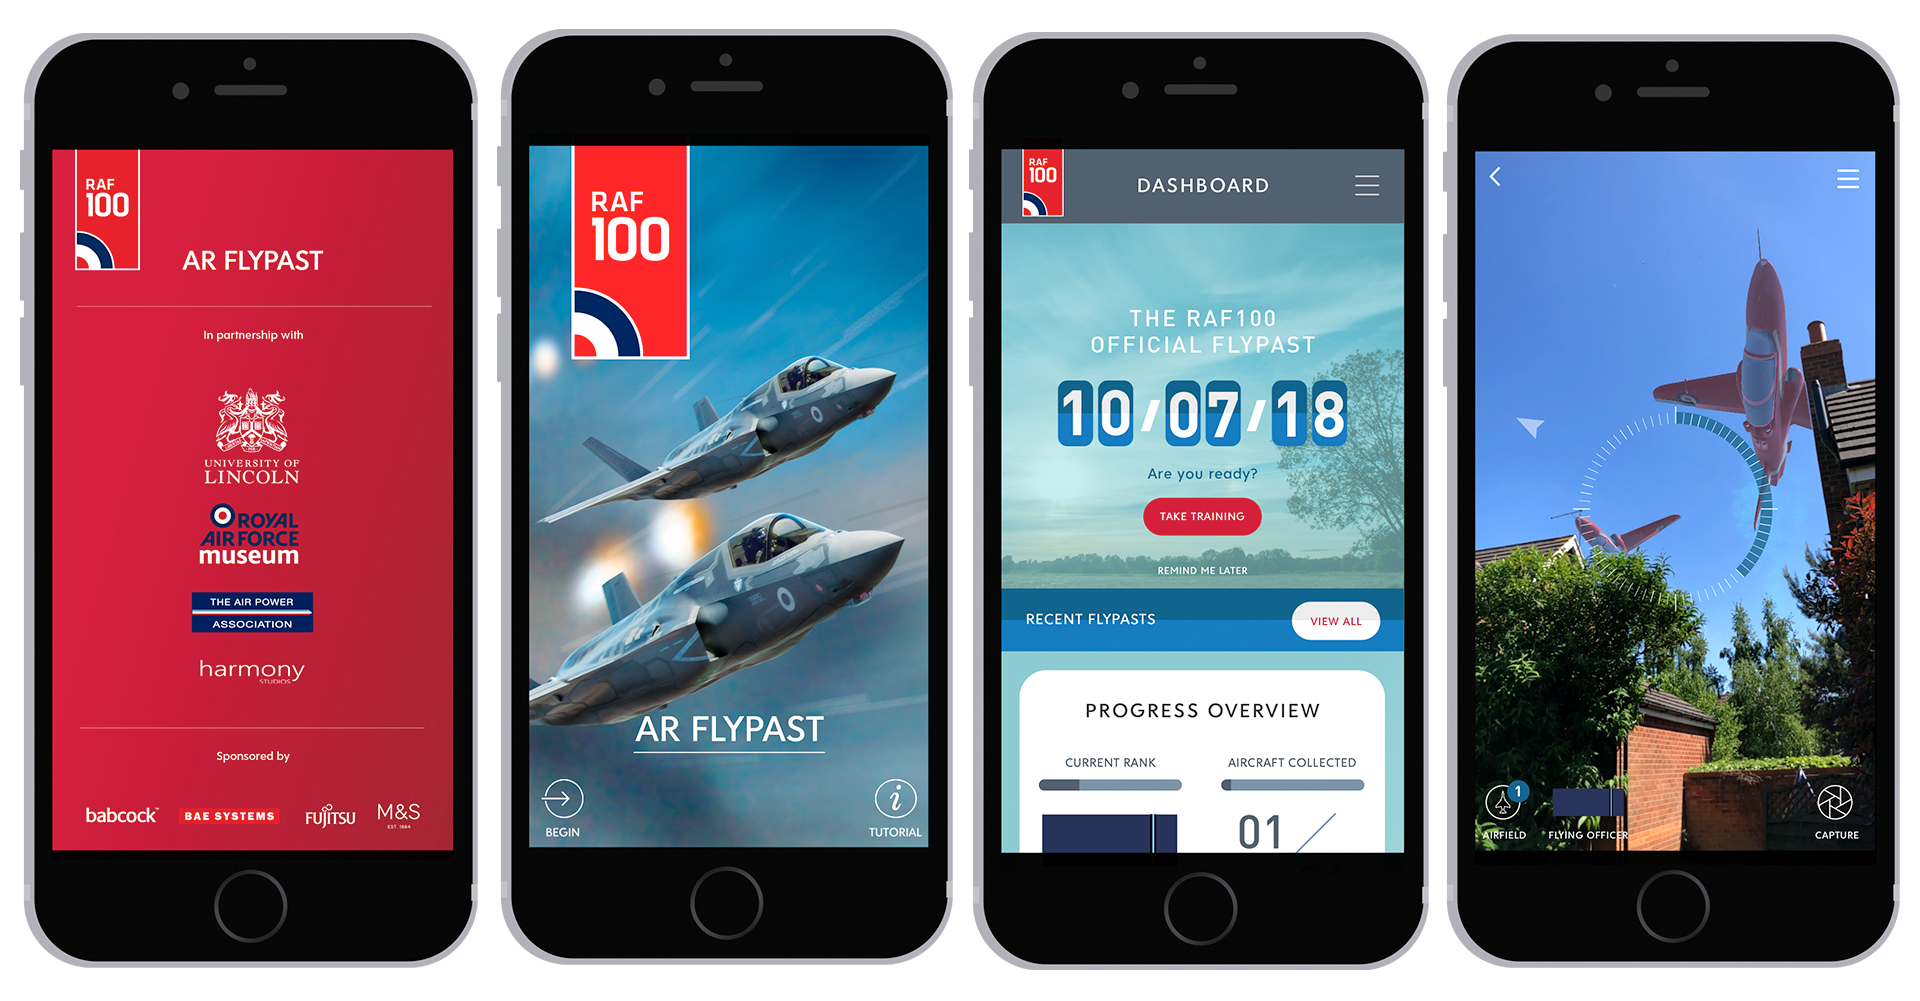 Images of 4 iphone screens showing different parts of the RAF100 flypast app